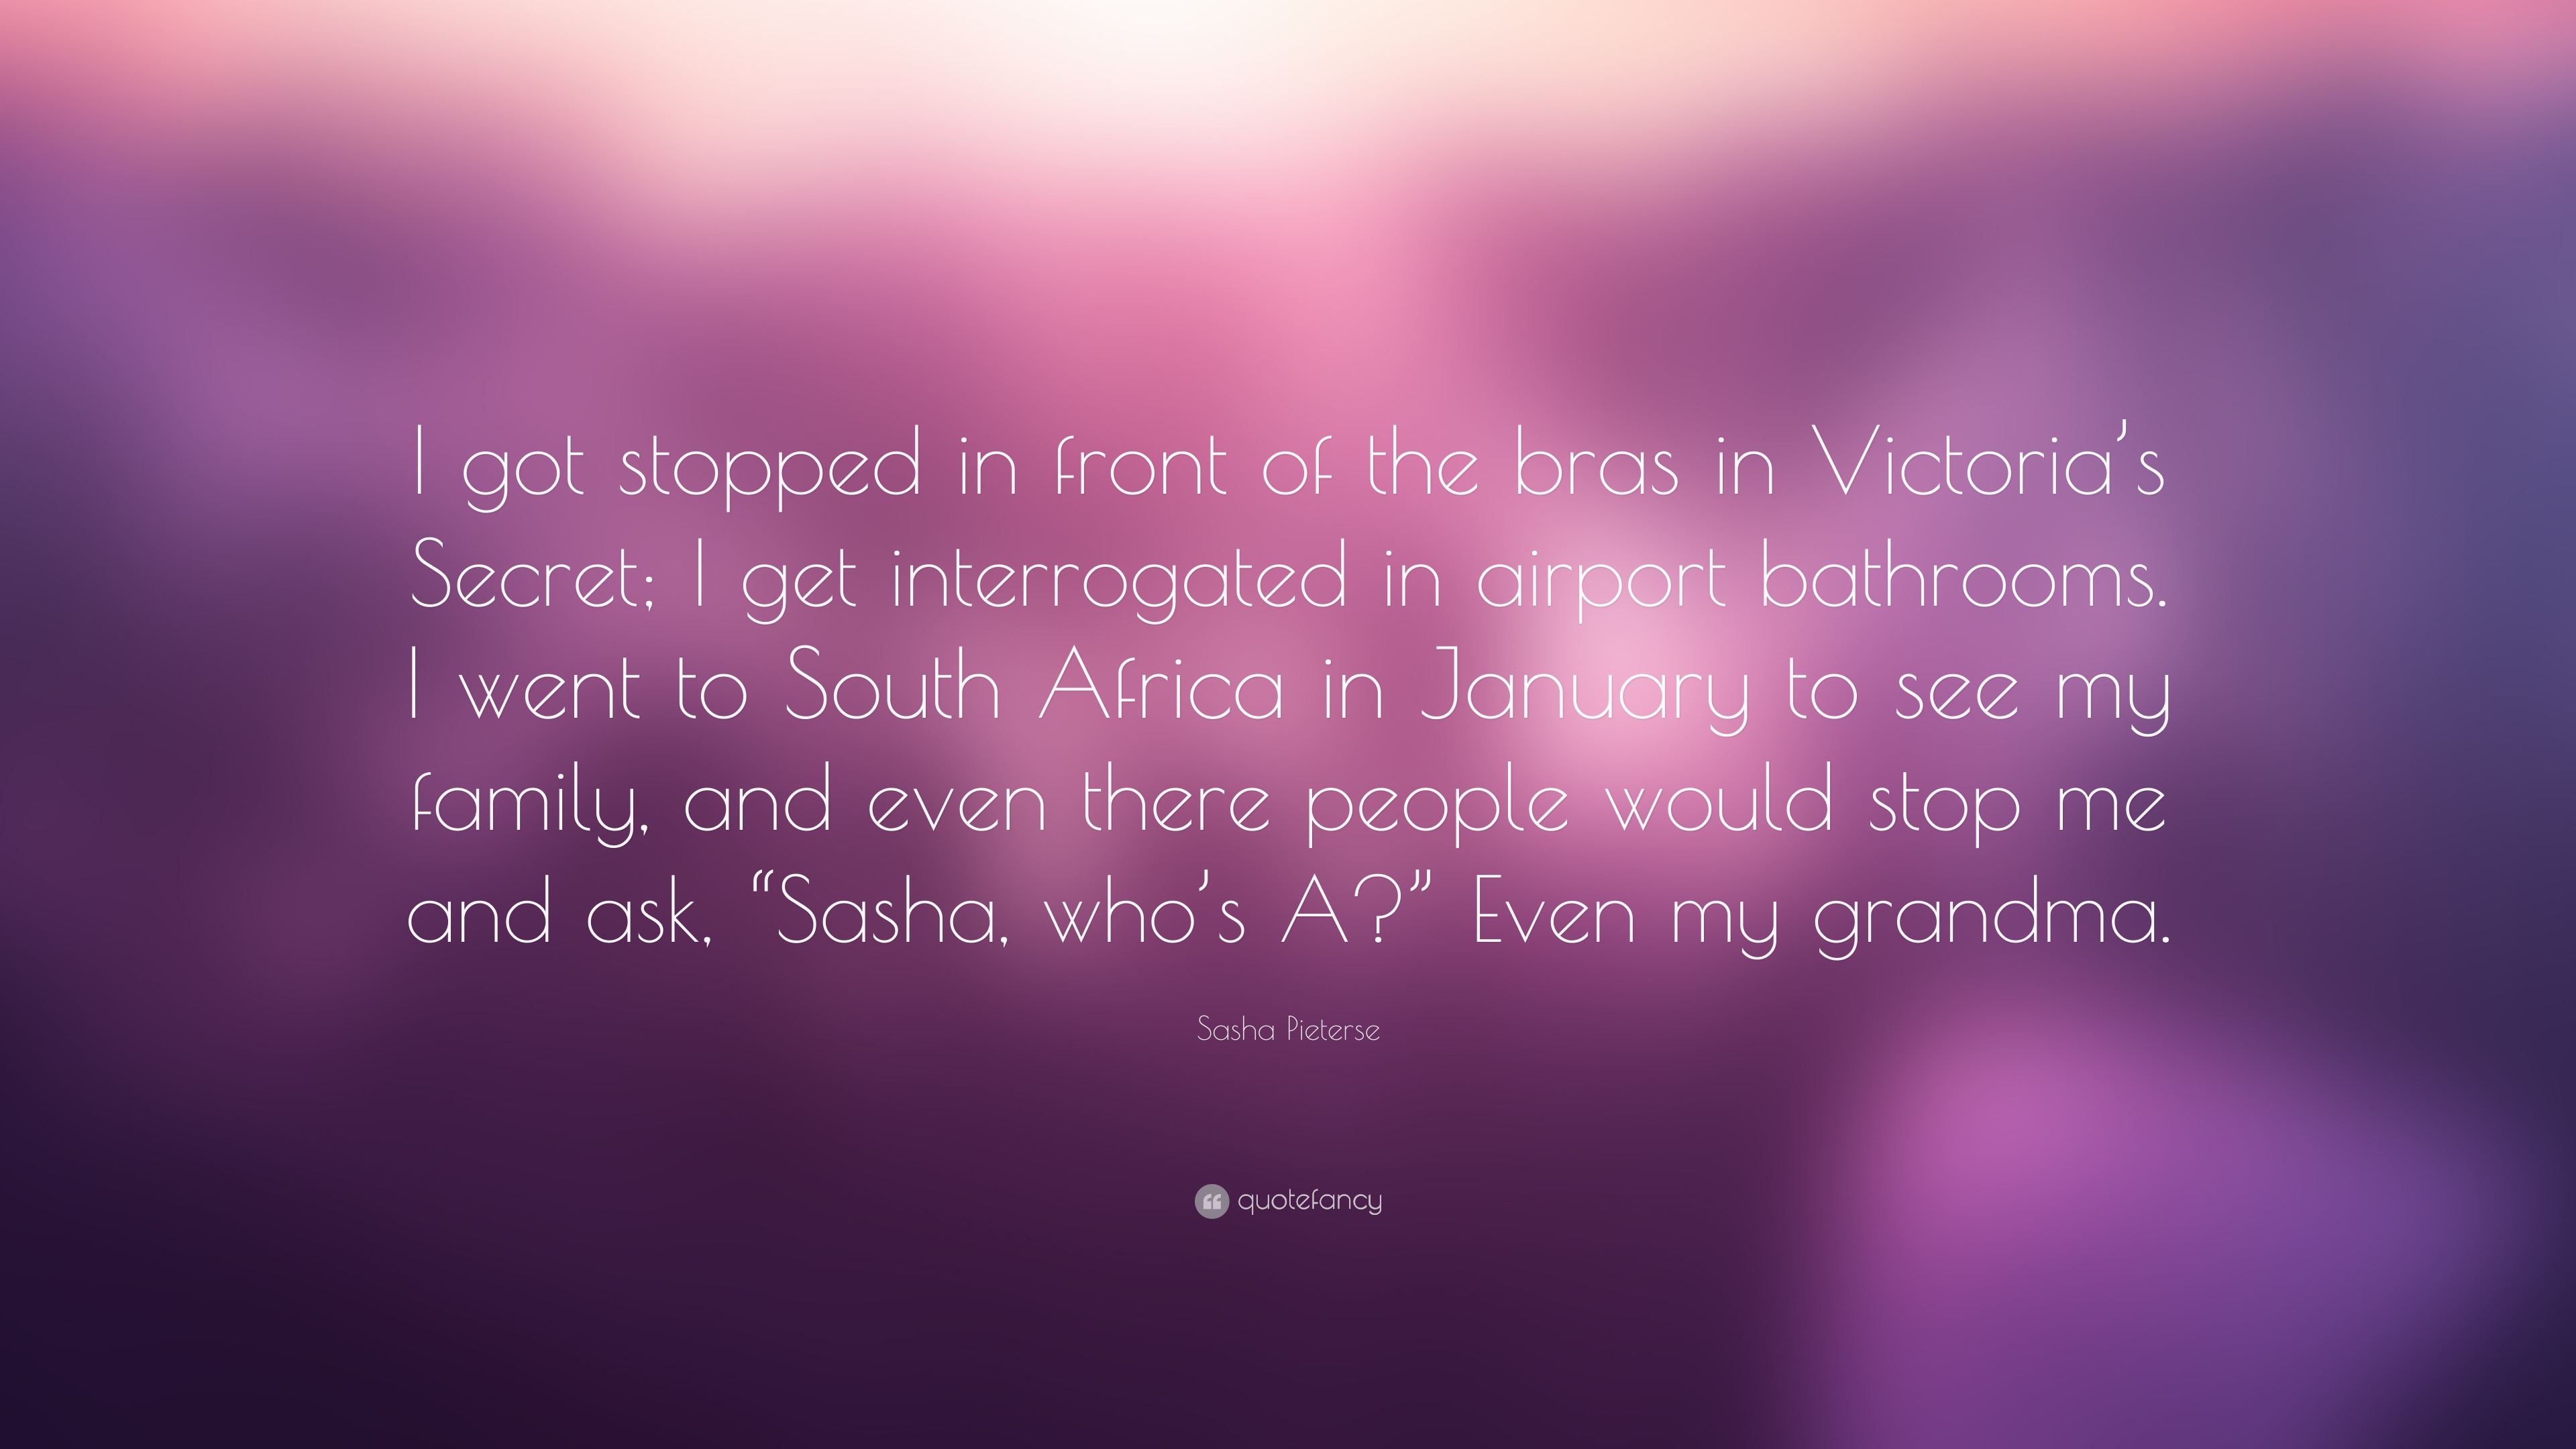 Sasha Pieterse Quote: “I got stopped in front of the bras in